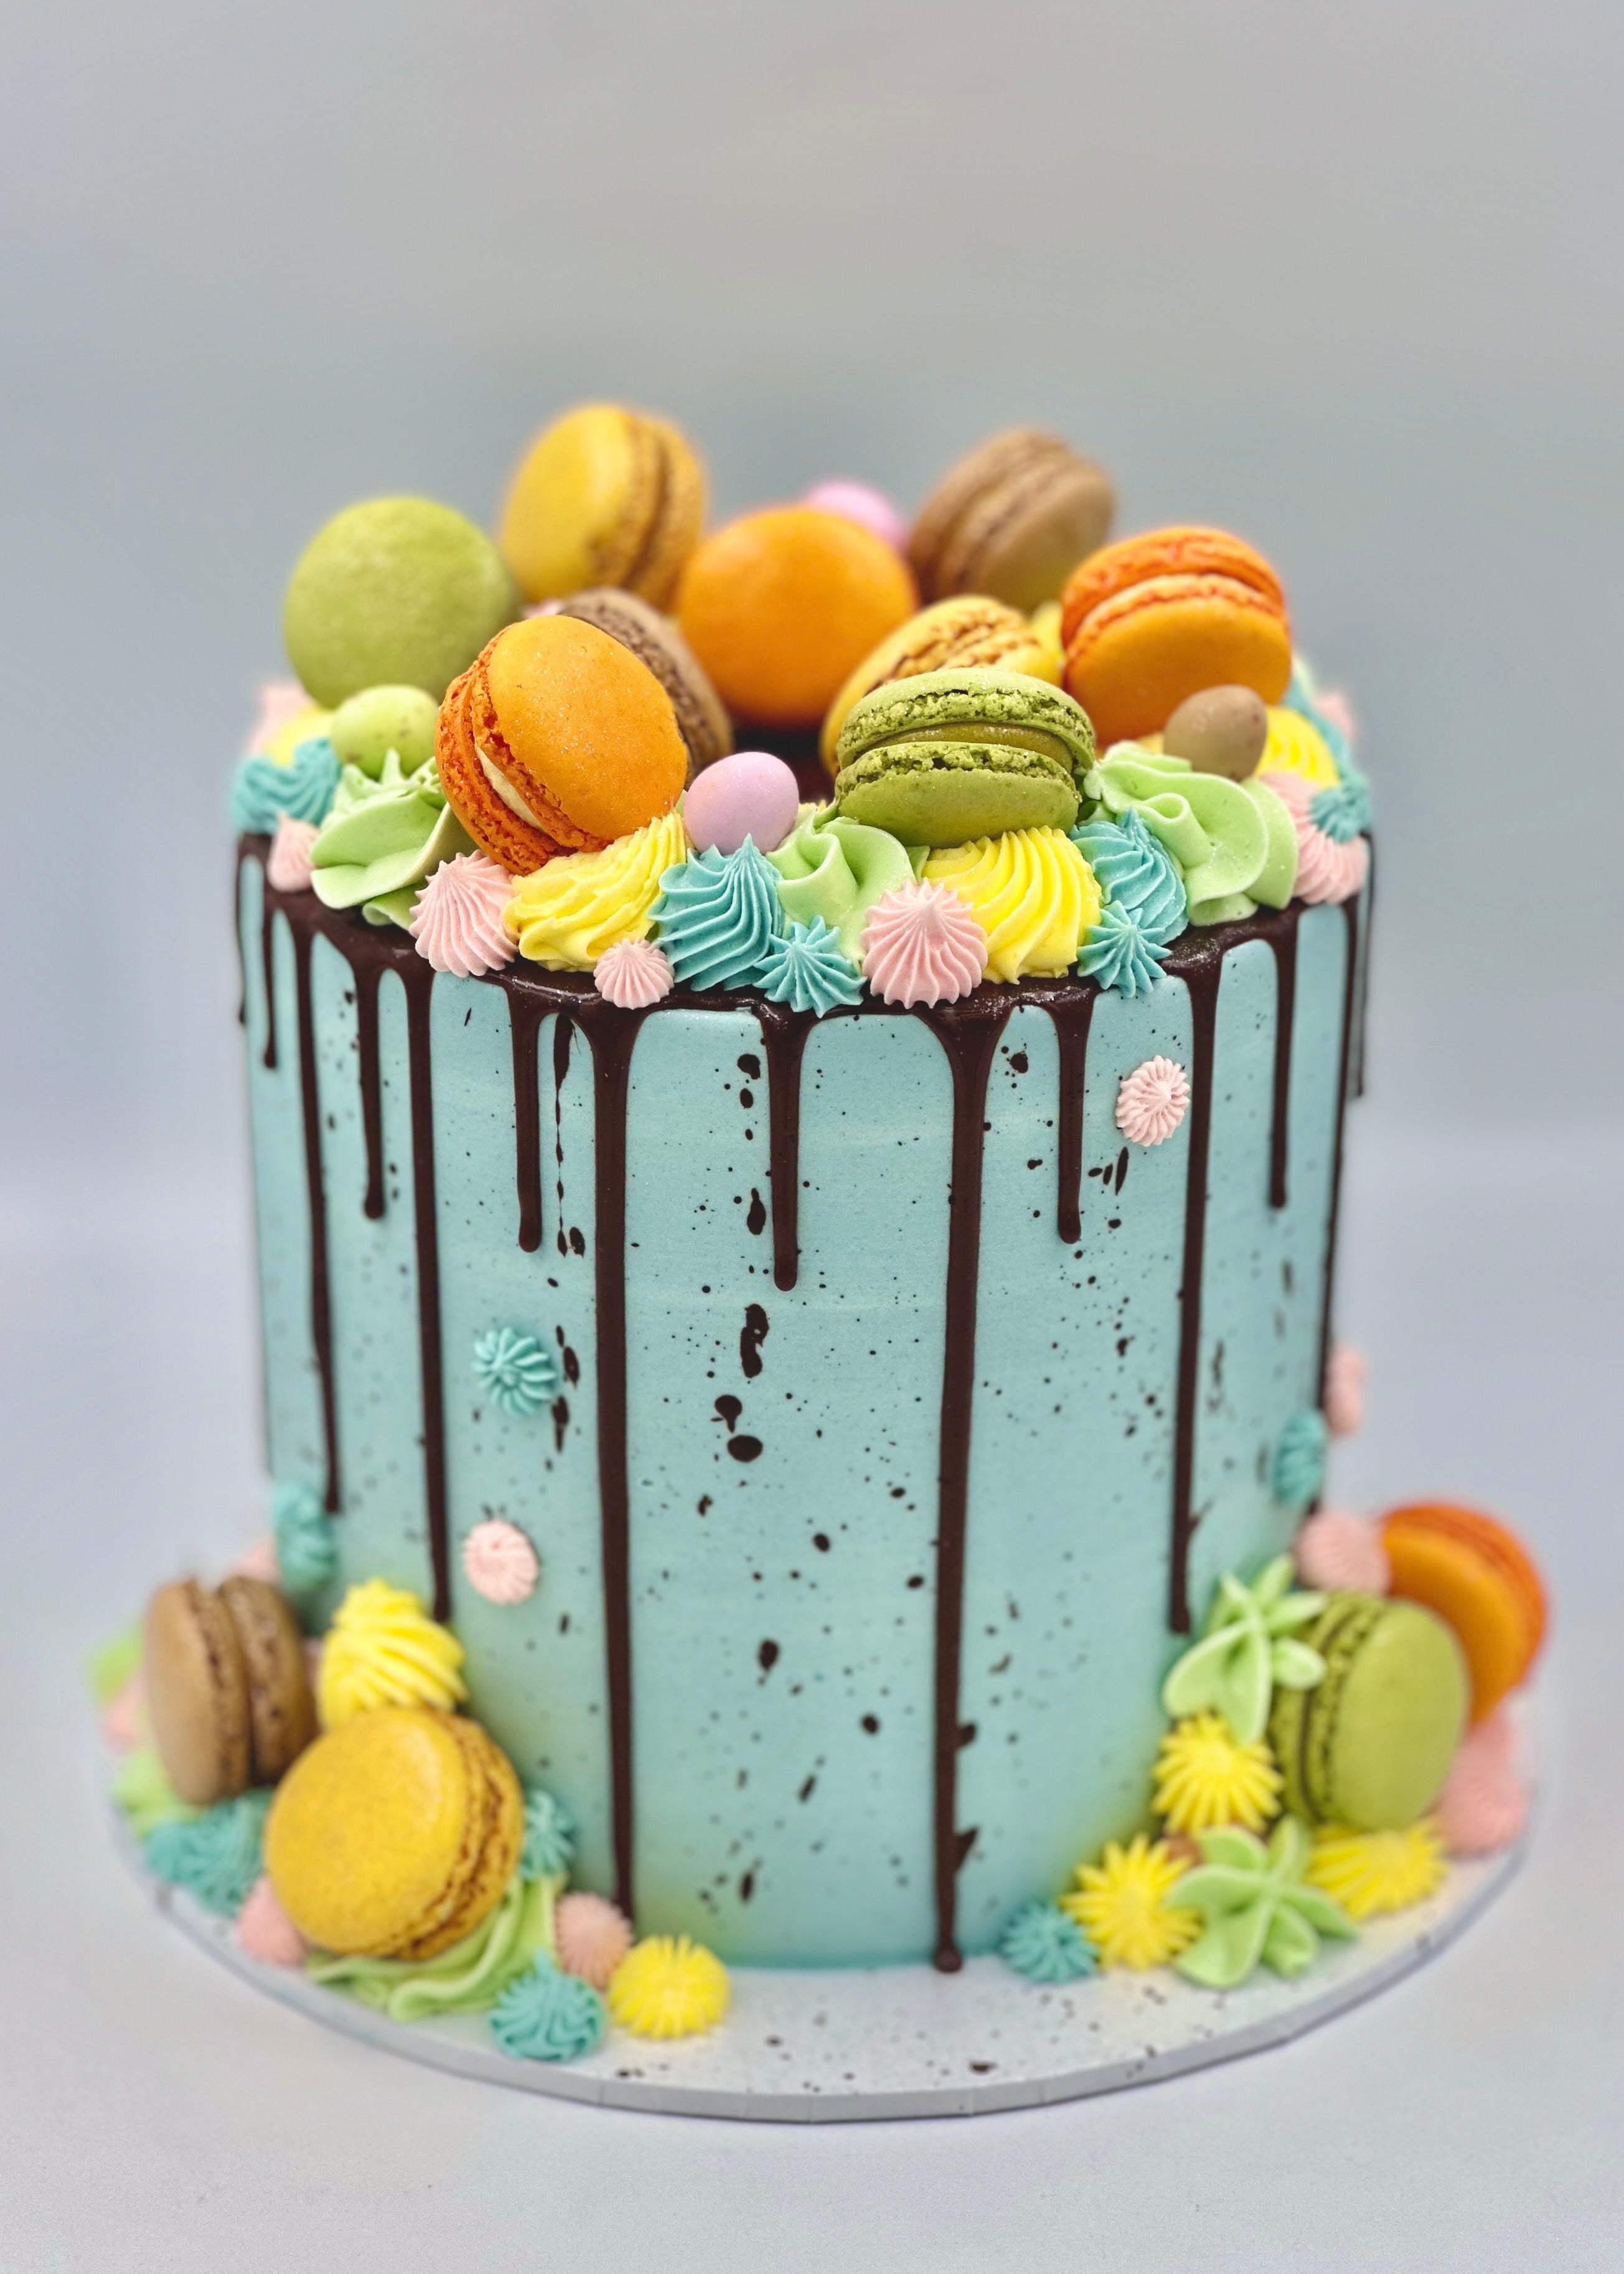 Deluxe Easter Cake